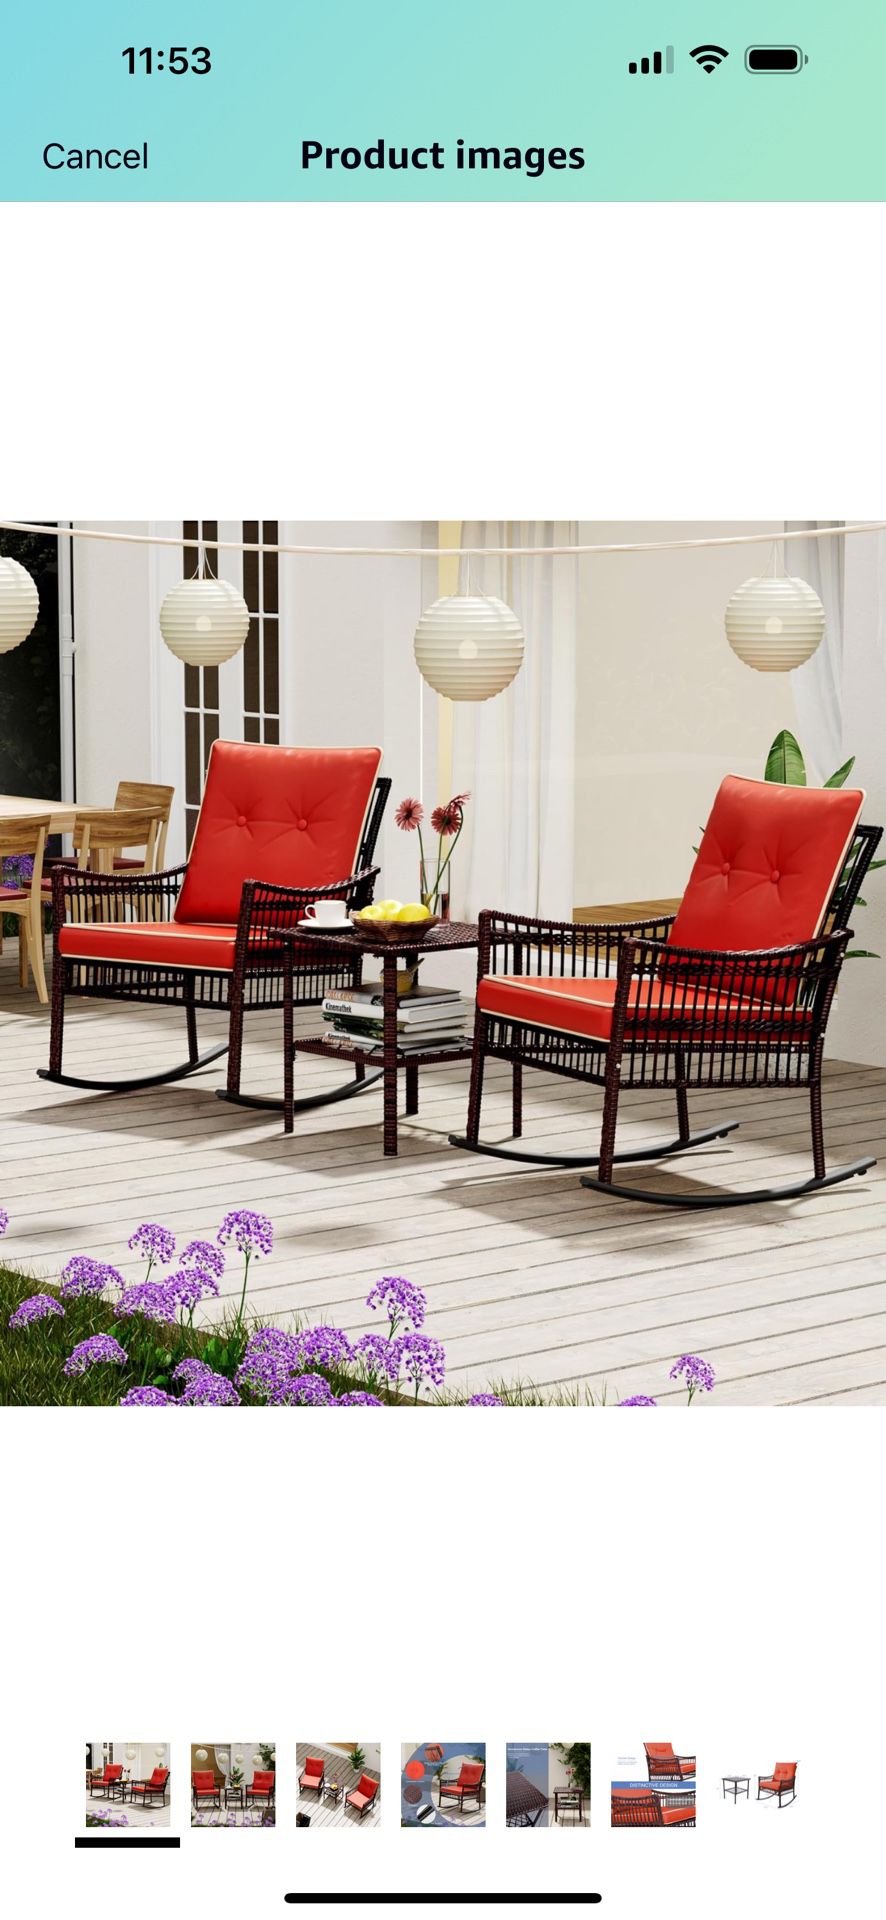 Brand New! 3 PCS Patio Conversation Chair Set with Coffee Table, Rocking Bistro Set, Outdoor Rocking Chairs Set, Wicker Furniture for Porch Deck Garde